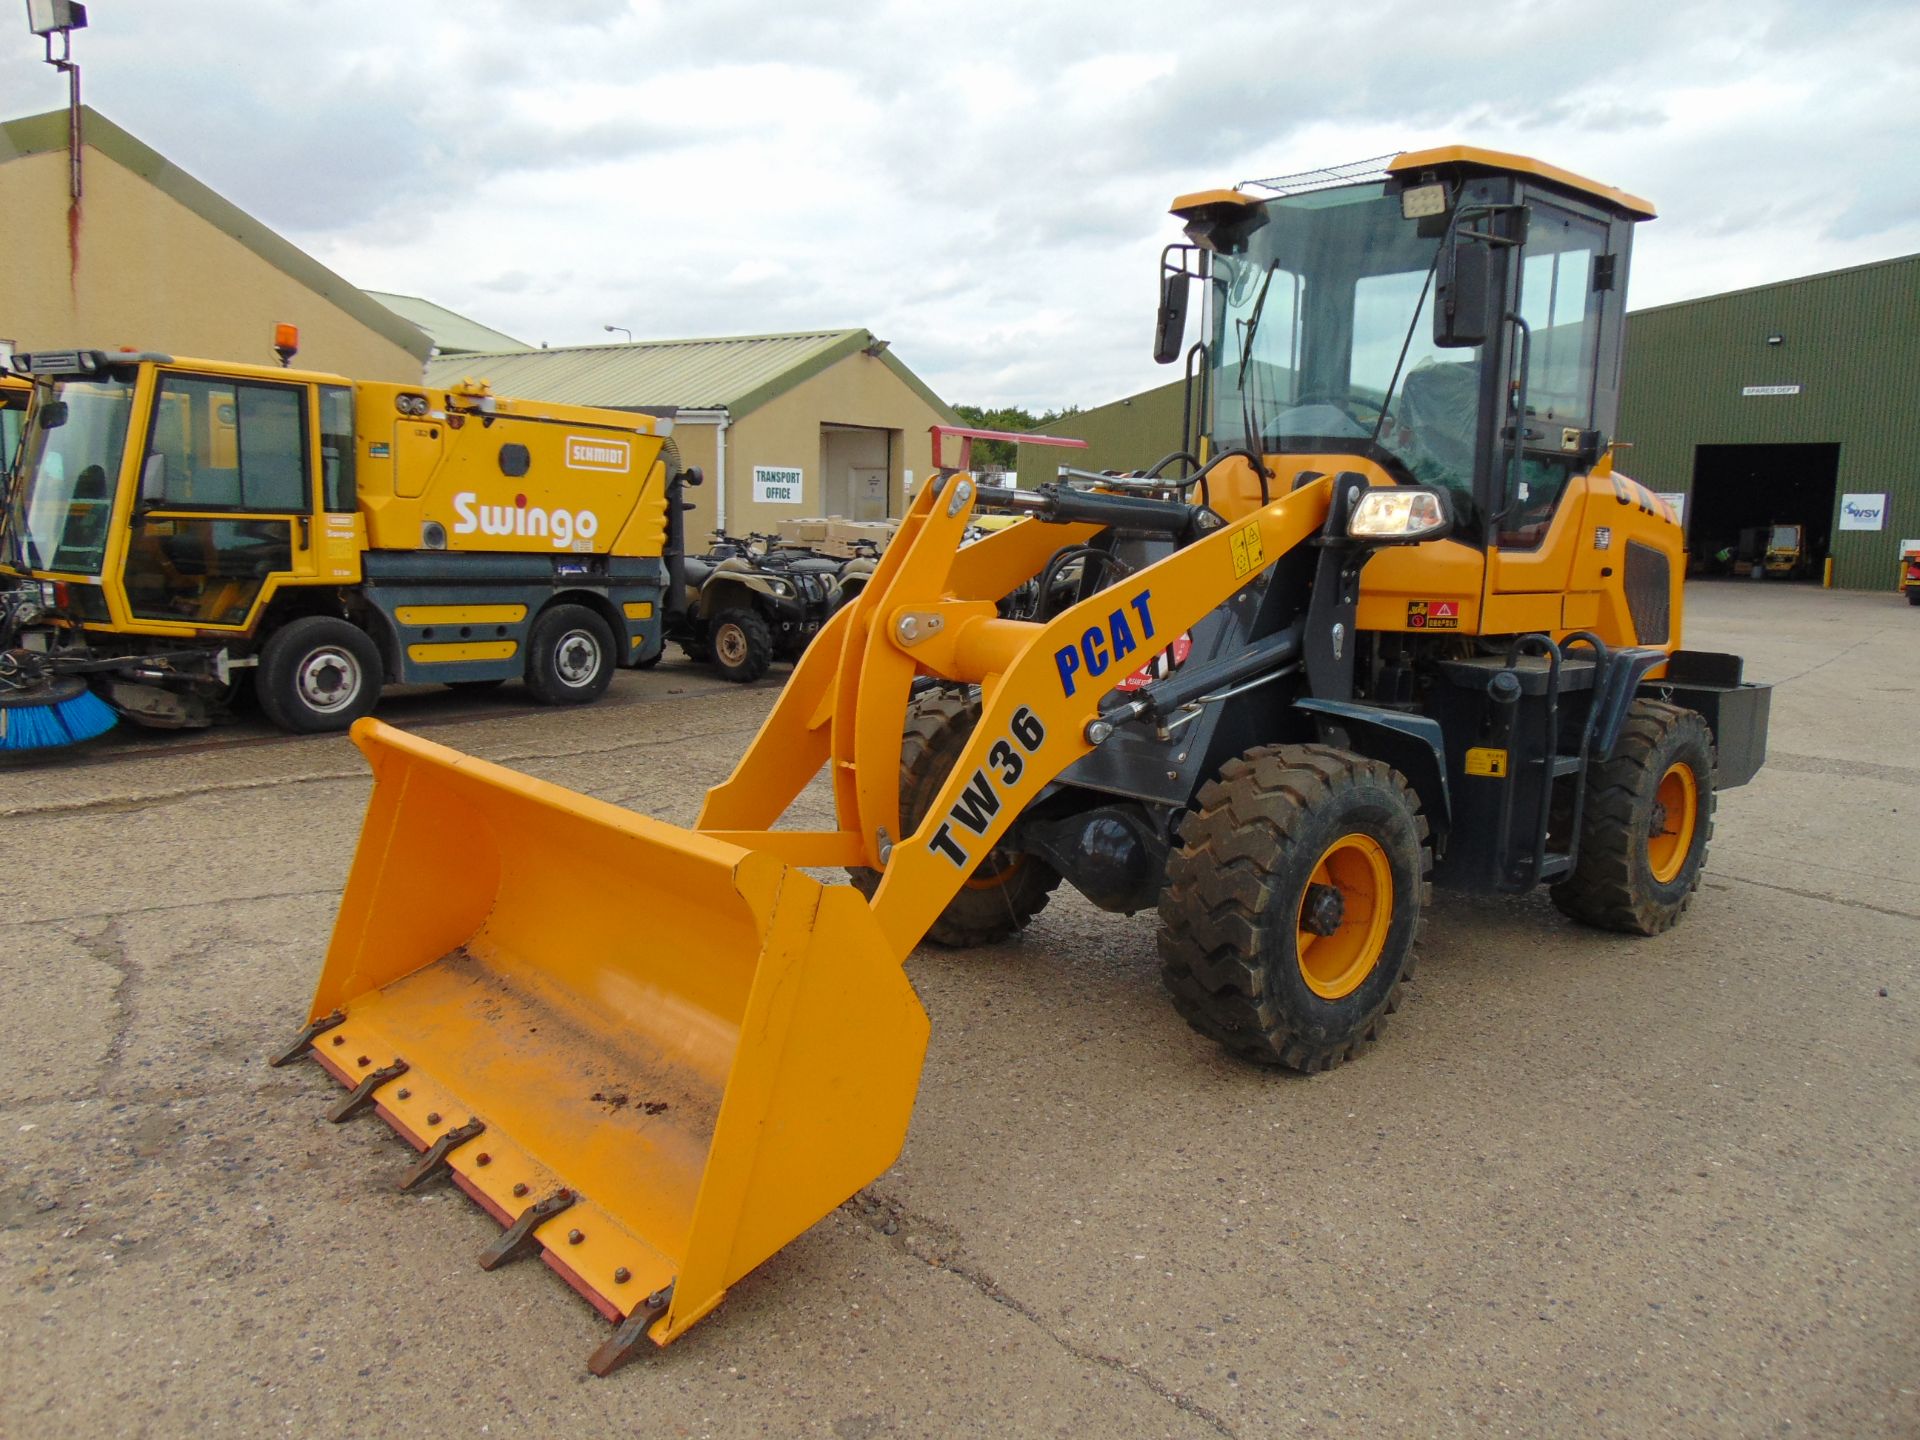 You are bidding for a New and Unused TW 36 4x4 Diesel Artic Wheel Loader